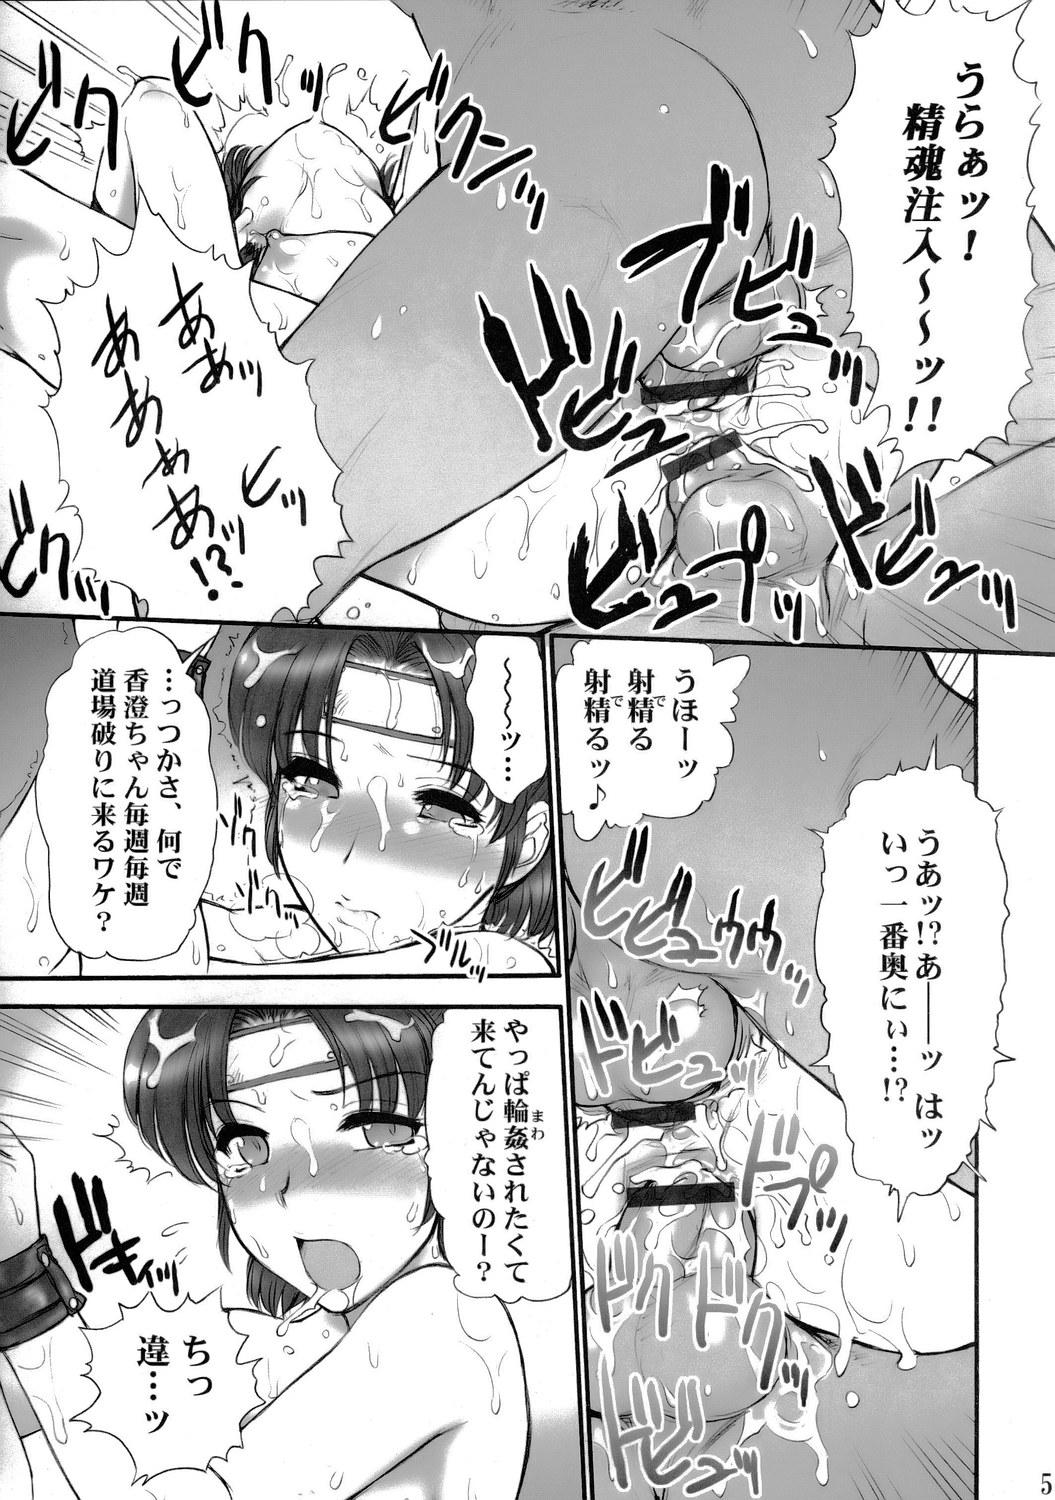 Collar (SC29) [Shinnihon Pepsitou (St. Germain-sal)] Report Concerning Kyoku-gen-ryuu (The King of Fighters) - King of fighters Amateur Blowjob - Page 6